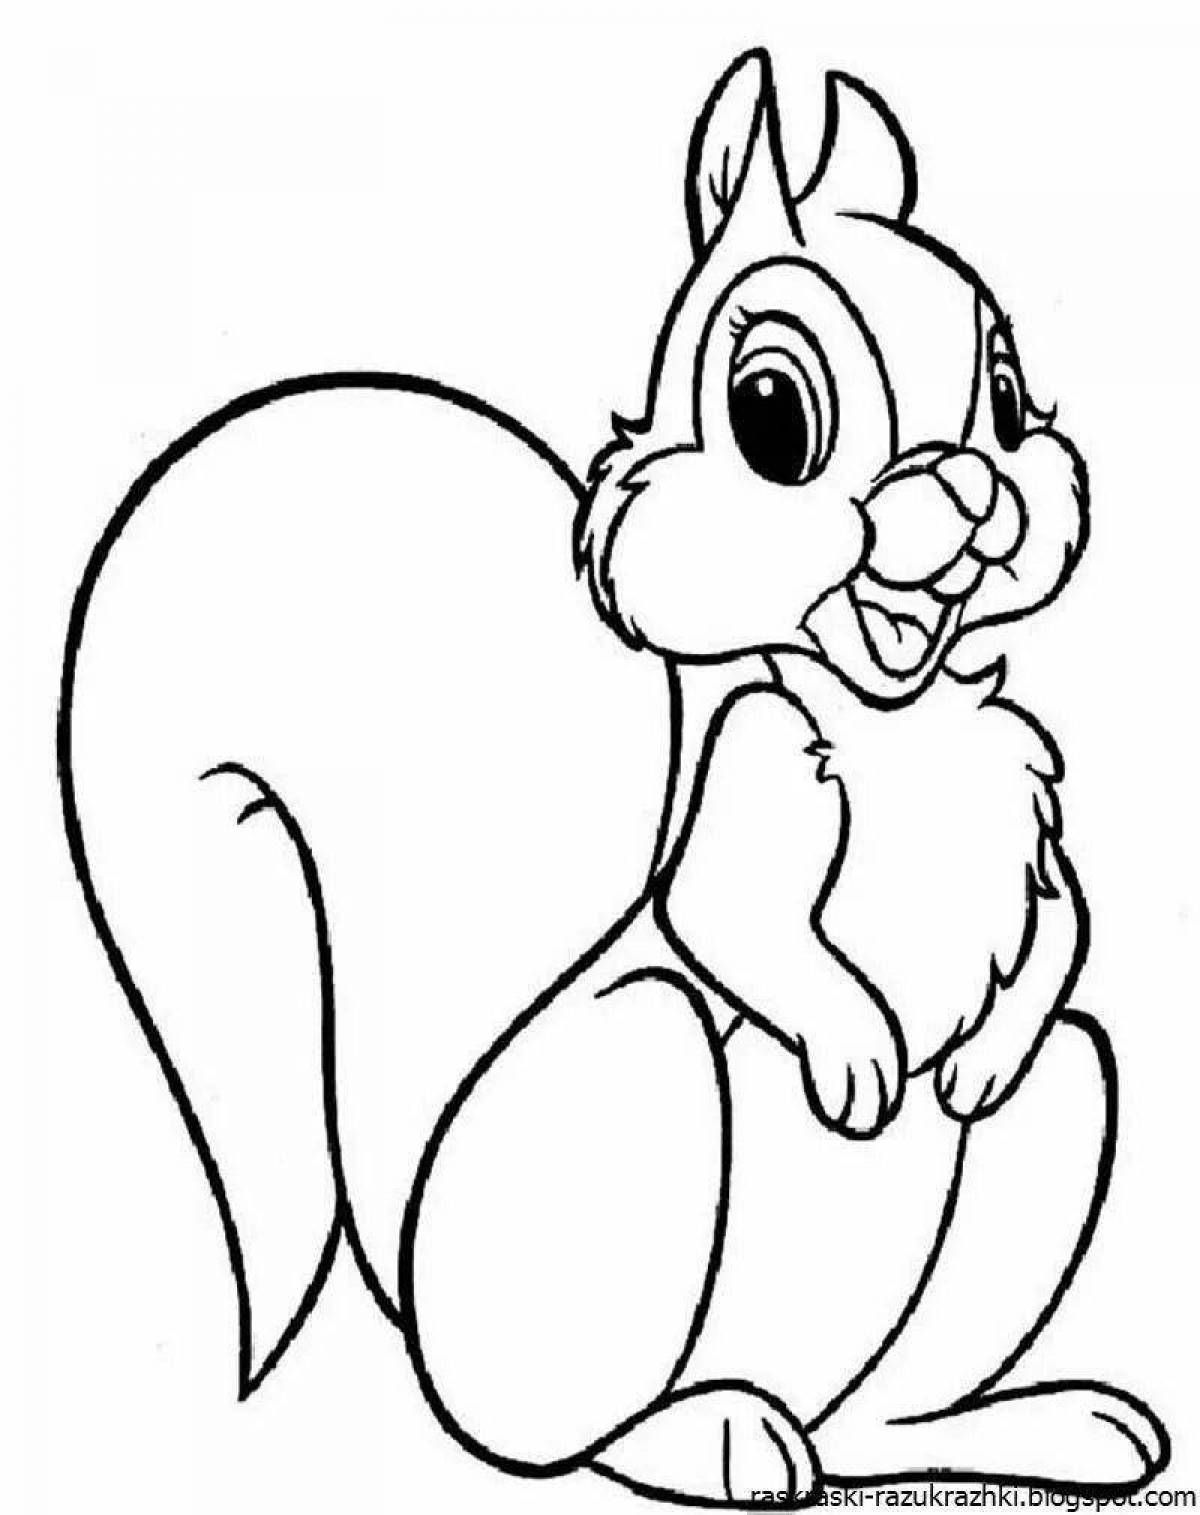 Funny drawing of a squirrel